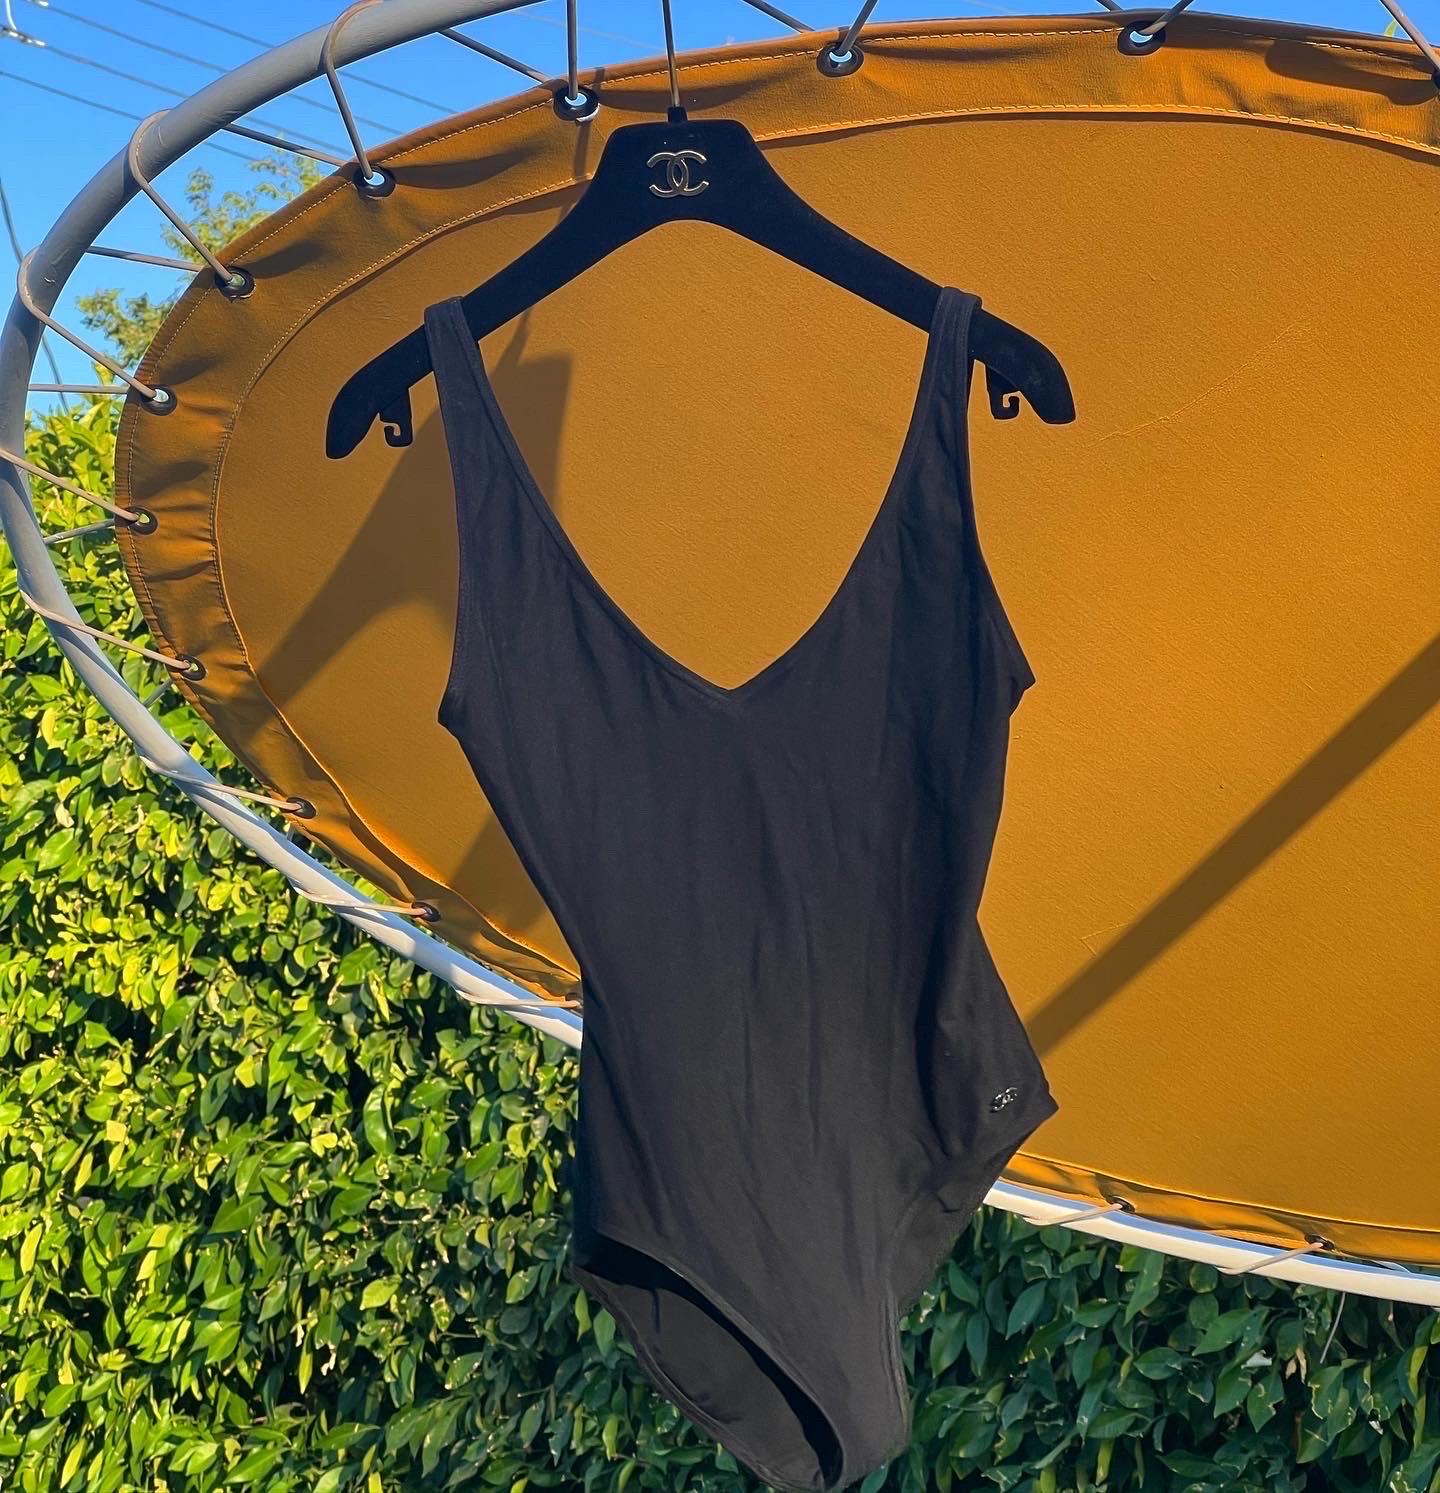 Chanel Swim? Name something better! Feel sleek and expensive in this blacked-out Chanel swim piece! Snag this today as it is a perfect basic to keep in your closet. This one-piece will hold you tight in all the right places to make you feel your